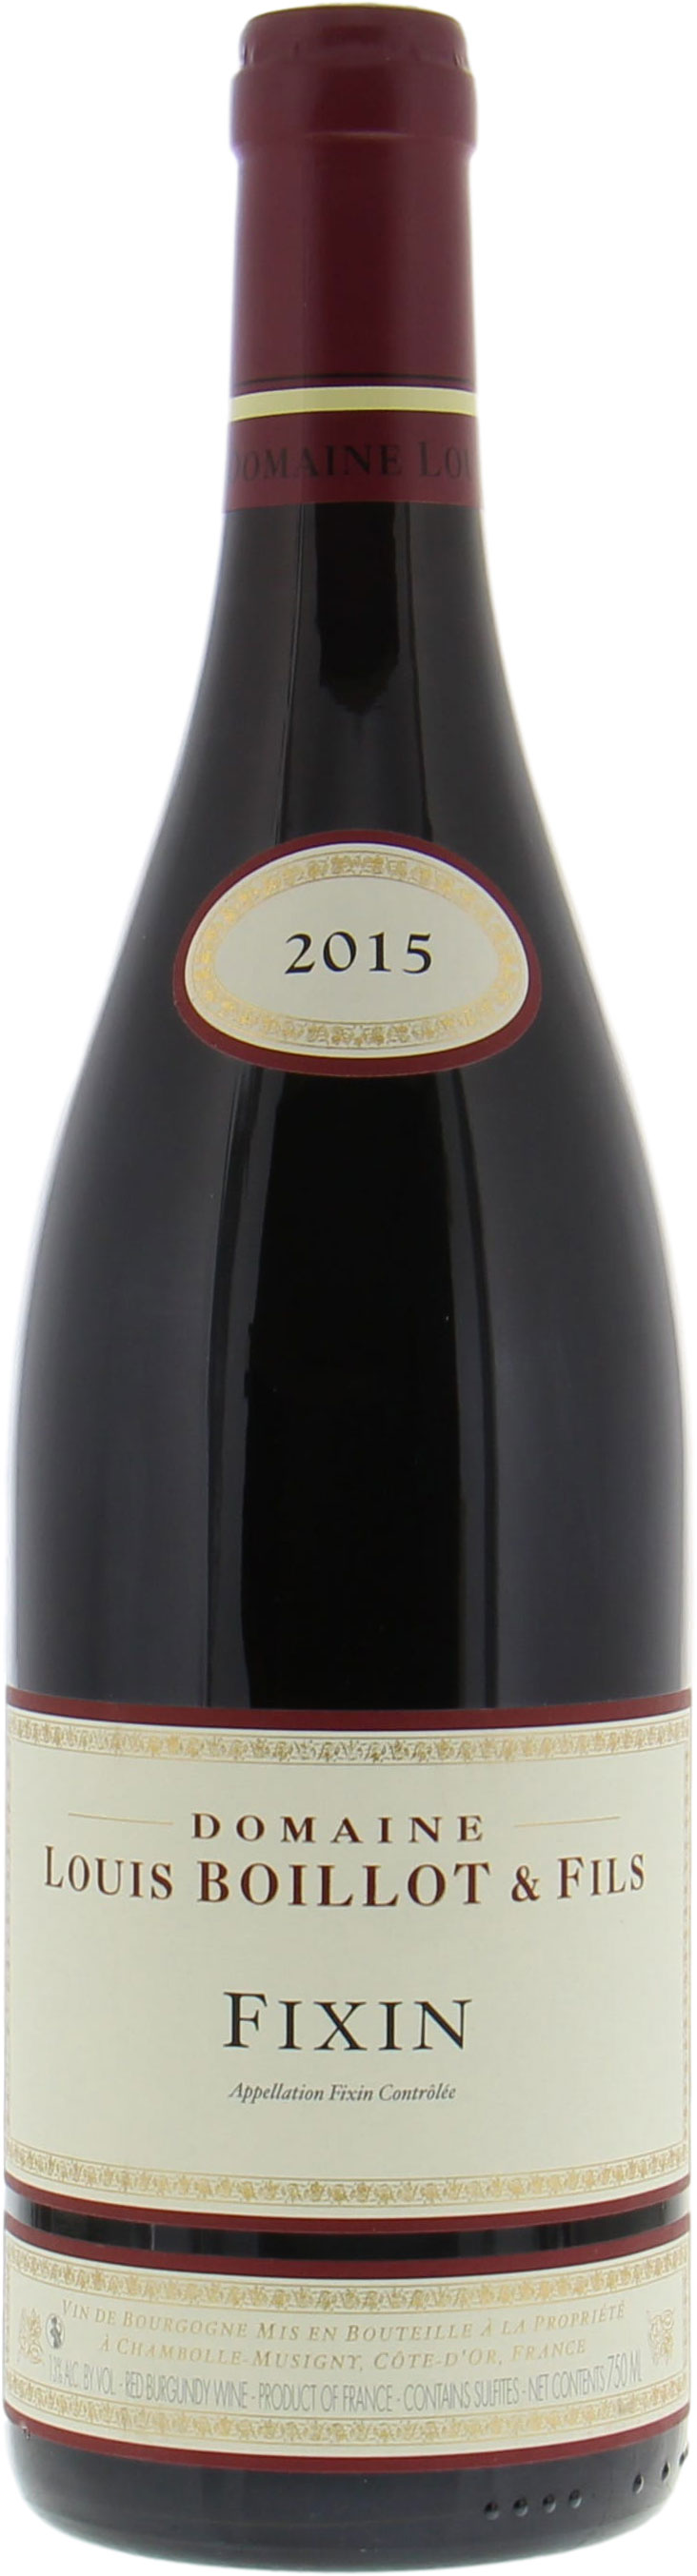 Domaine Louis Boillot - Fixin 2015 Perfect